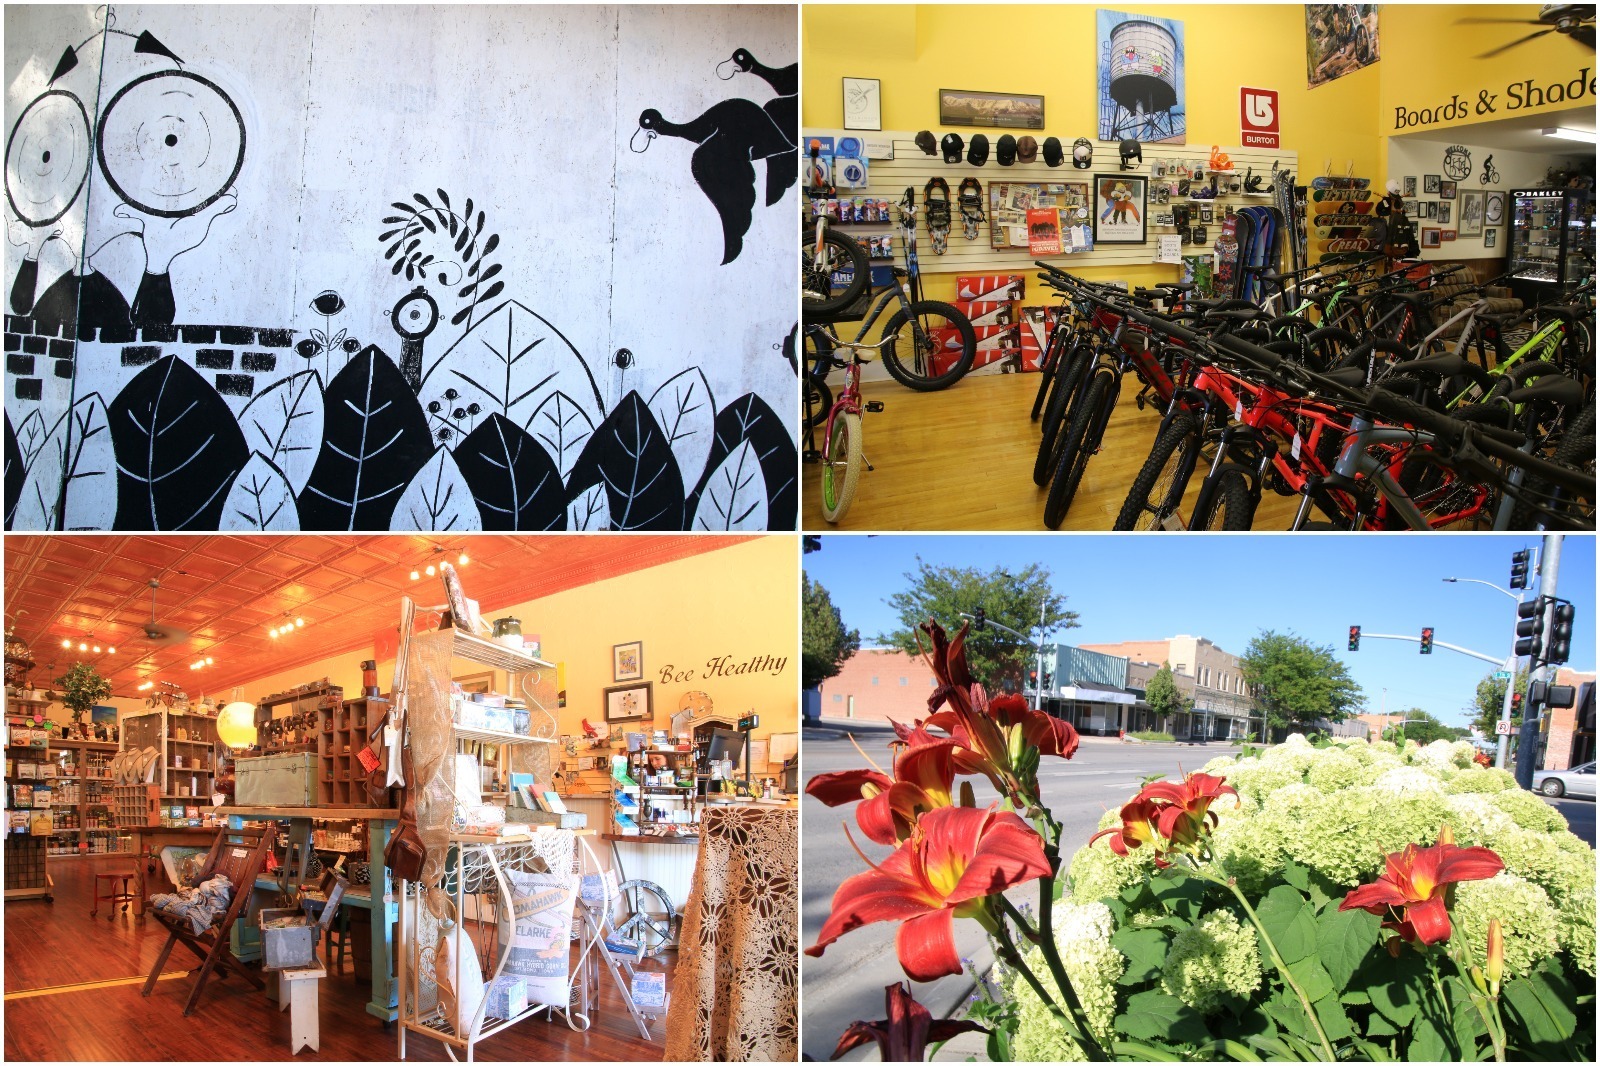 Downtown Worland, Wyoming, including a mural, bike shop, health food store, and flowers.